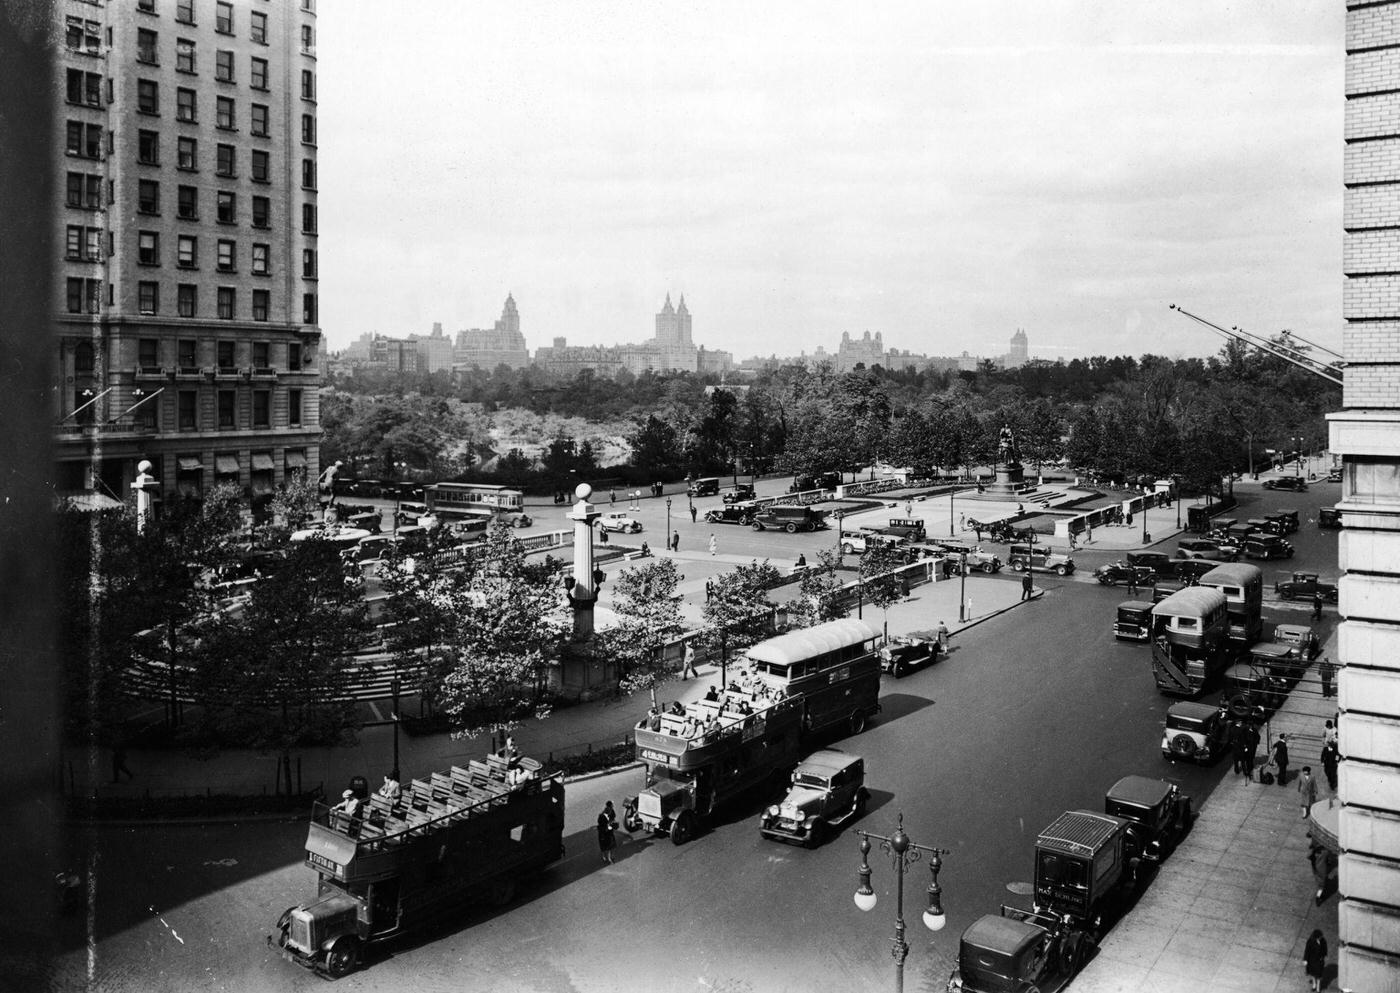 View Of Central Park From South West Corner Looking North, Plaza Hotel Visible, New York City, Circa 1900S